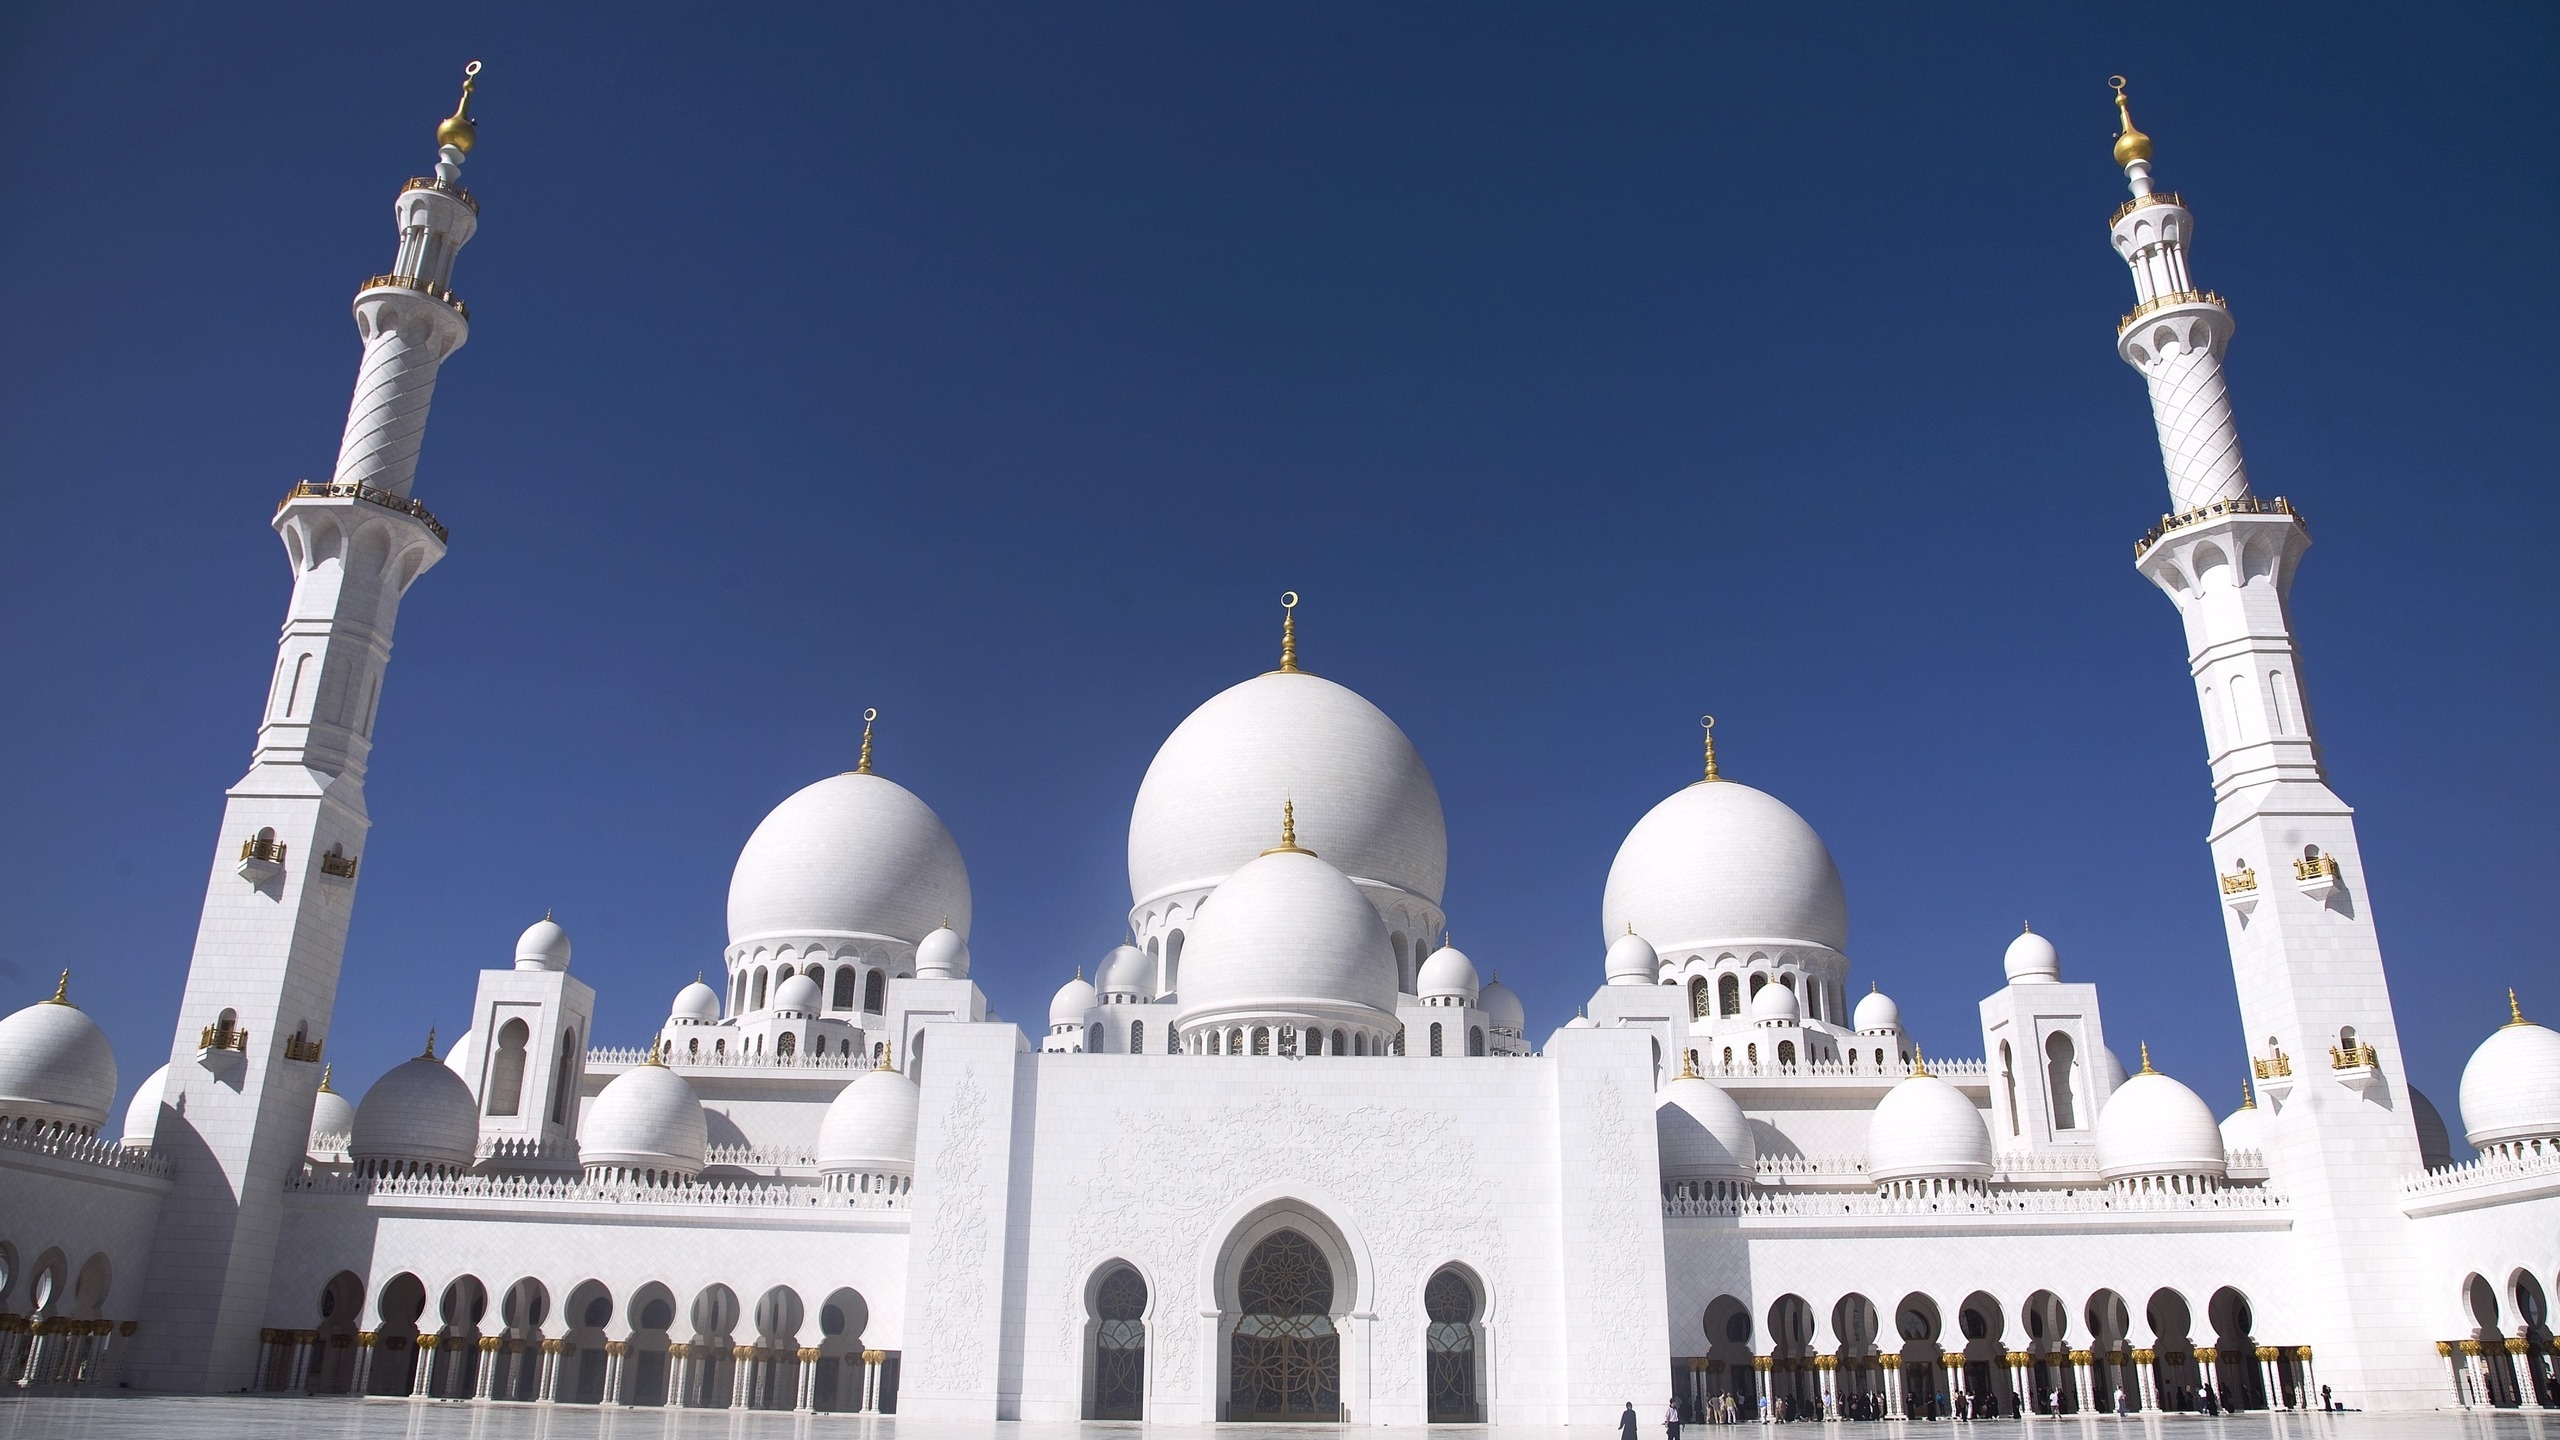 Grand Mosque Abu Dhabi for 2560x1440 HDTV resolution